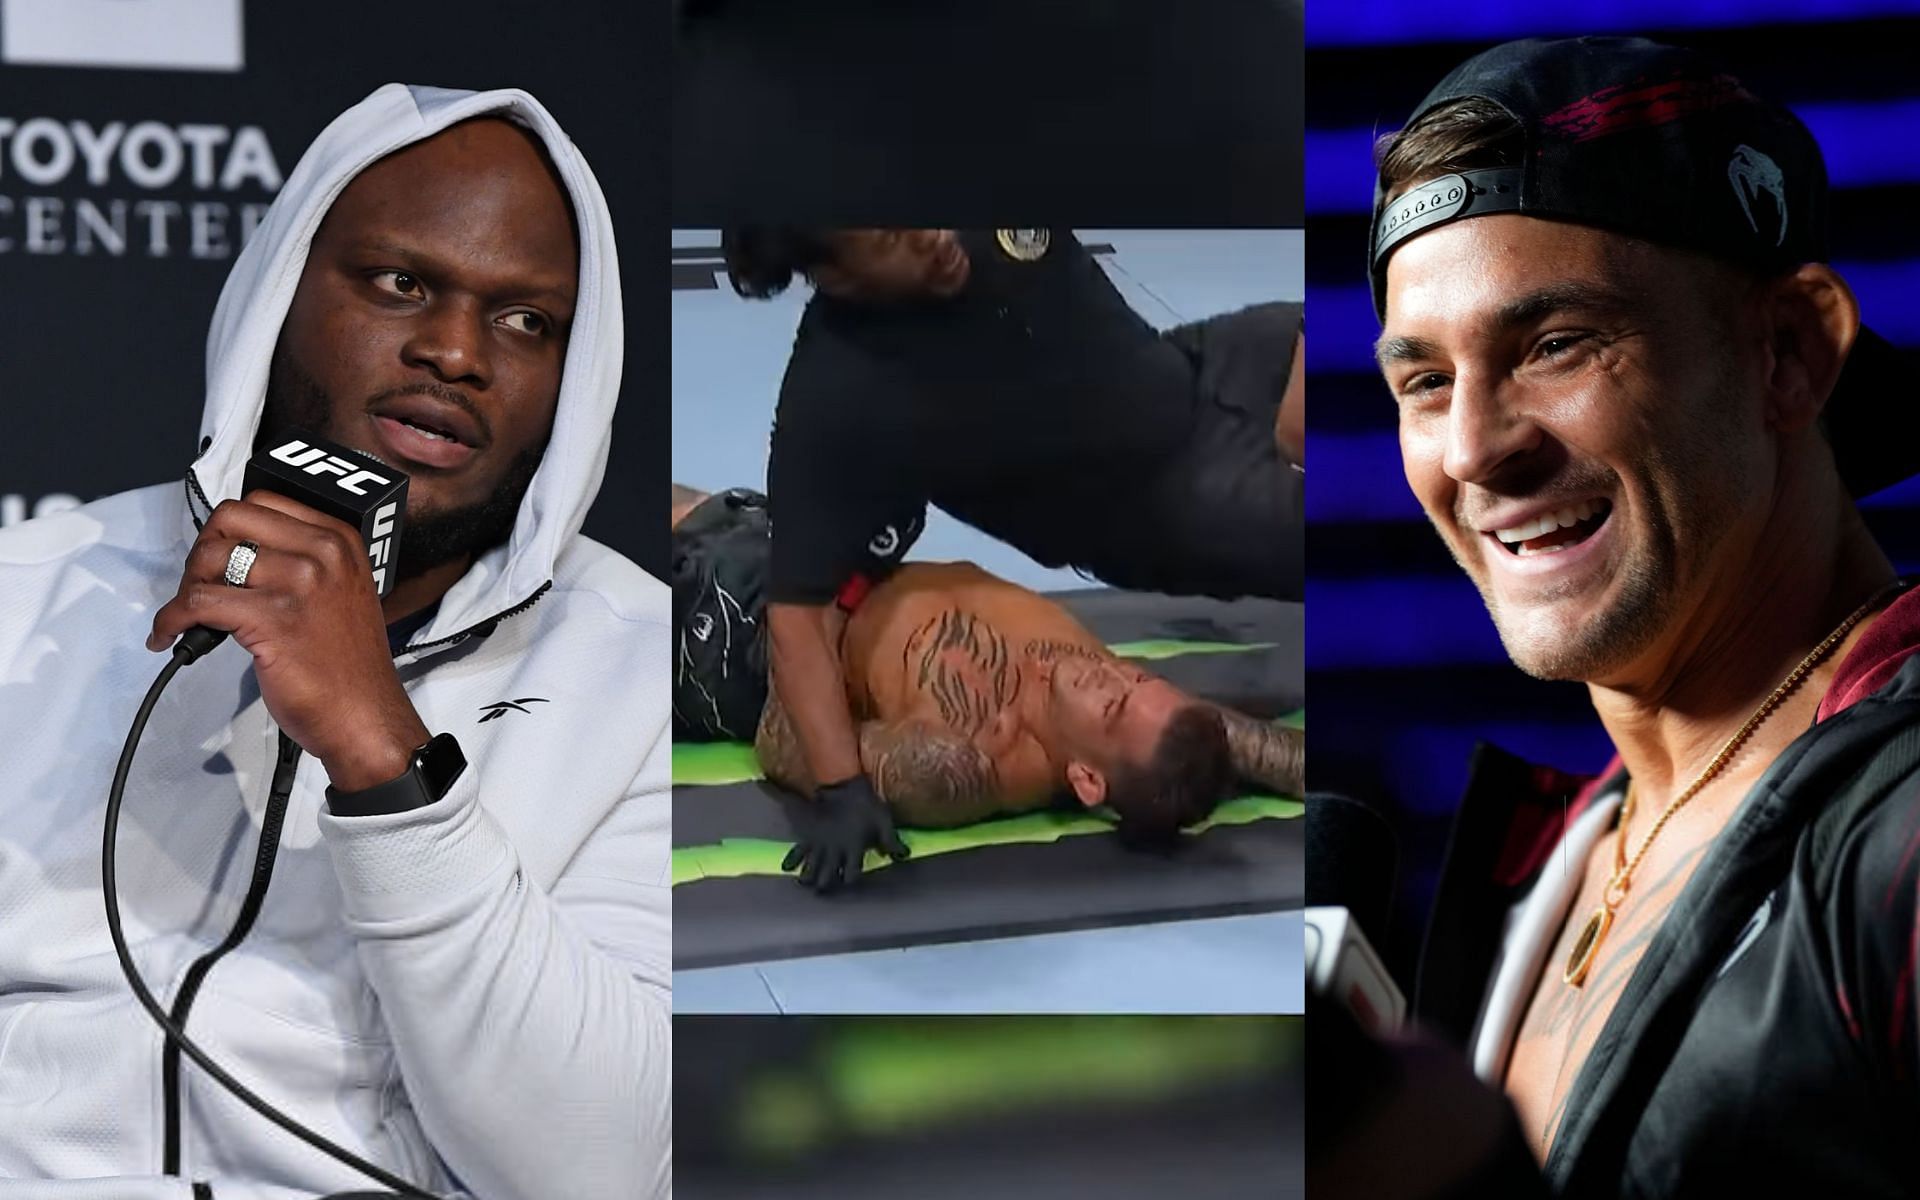 Derrick Lewis (left), Herb Dean at UFC 291 (middle) and Dustin Poirier (right) [Images Courtesy: @GettyImages and @herbdeanmma on Instagram]